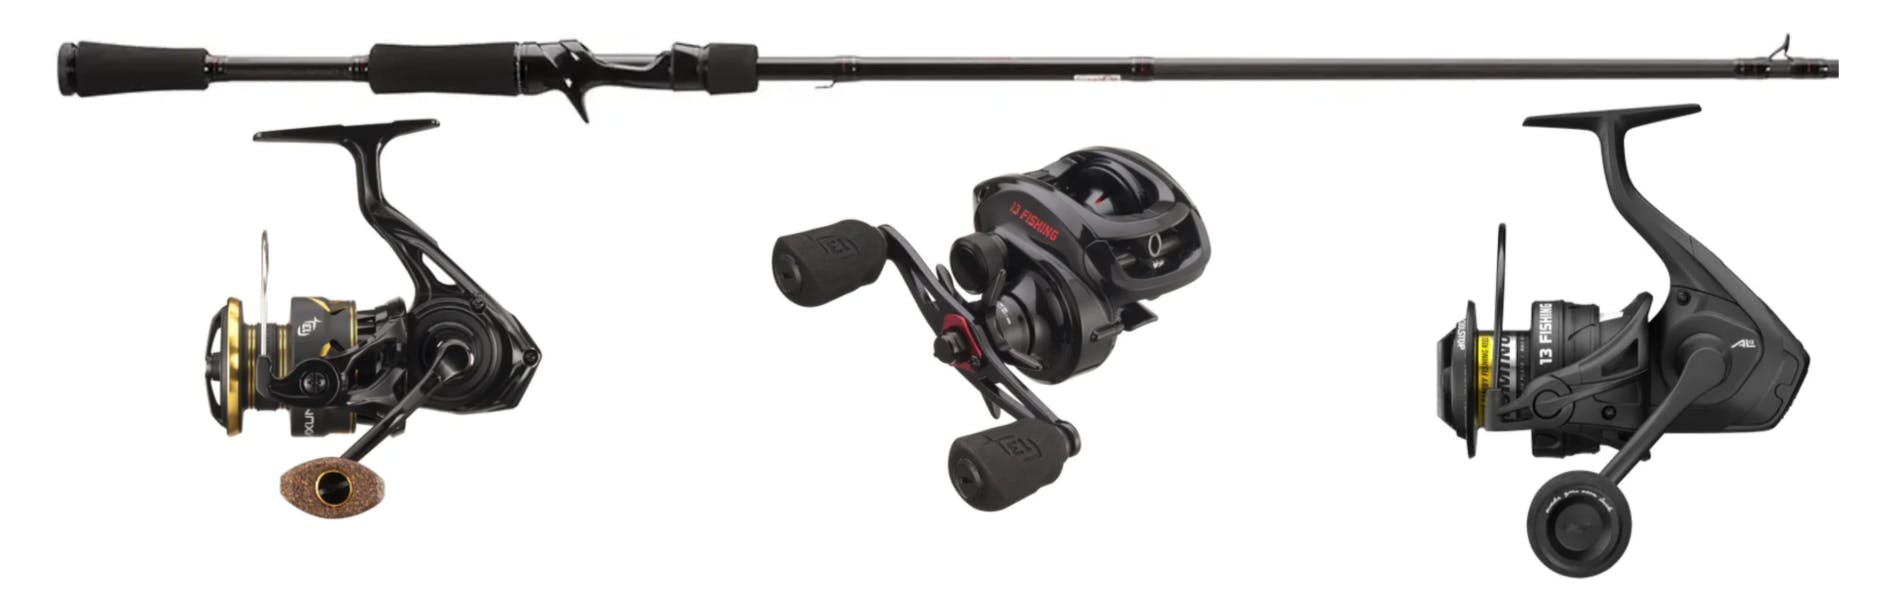 My Honest Opinion On The World's Lightest BFS Reel 